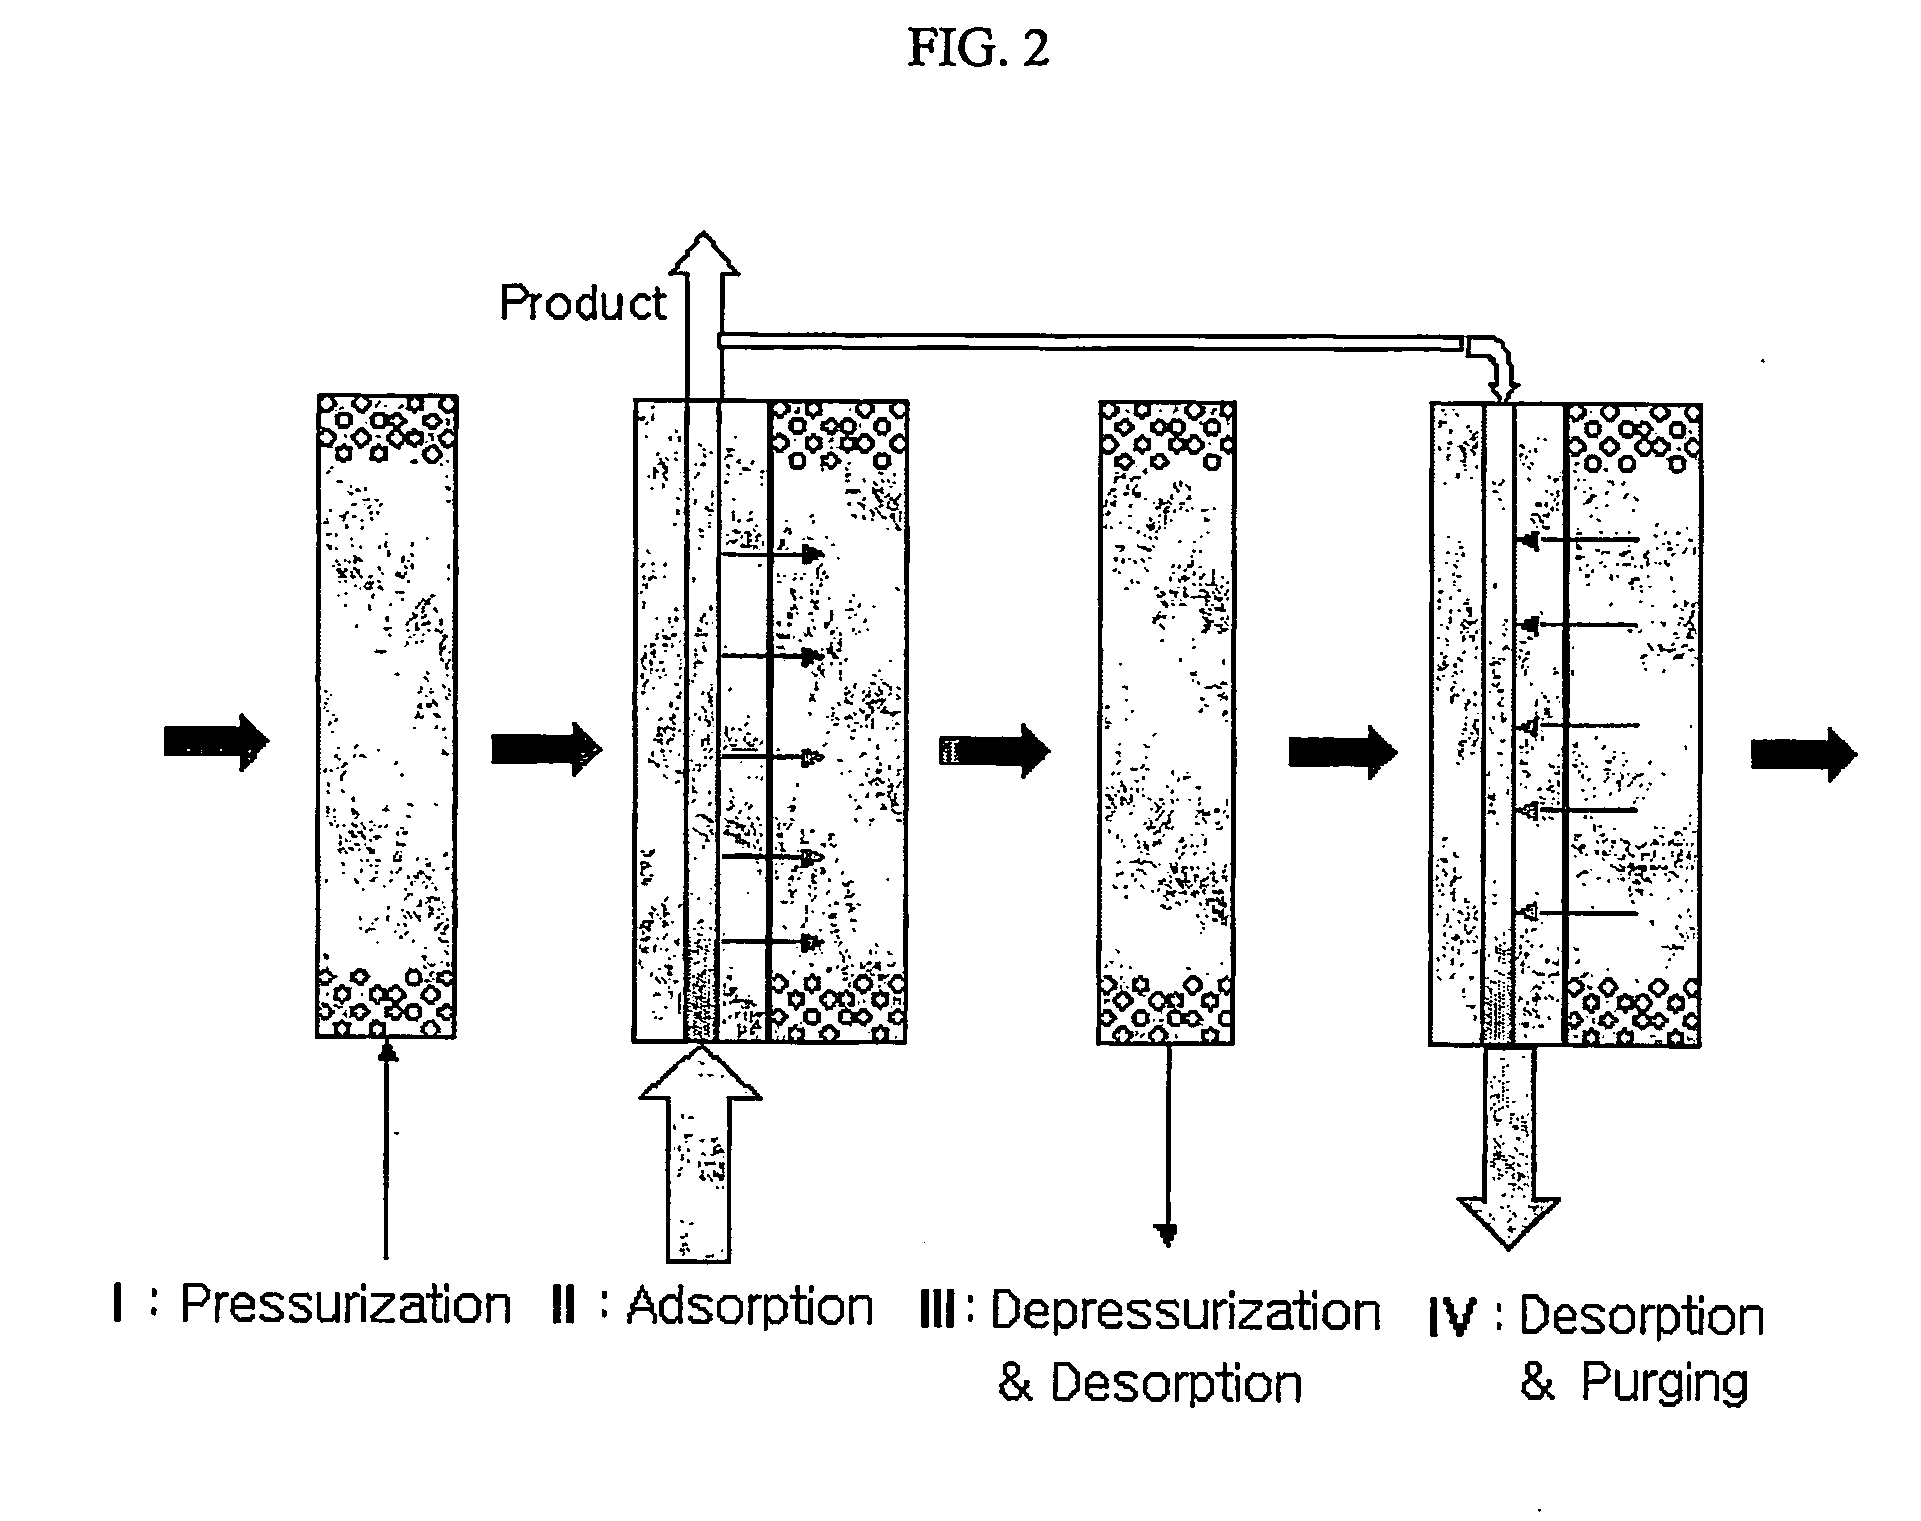 Method for producing a useful compound and treating a wastewater using pure oxygen